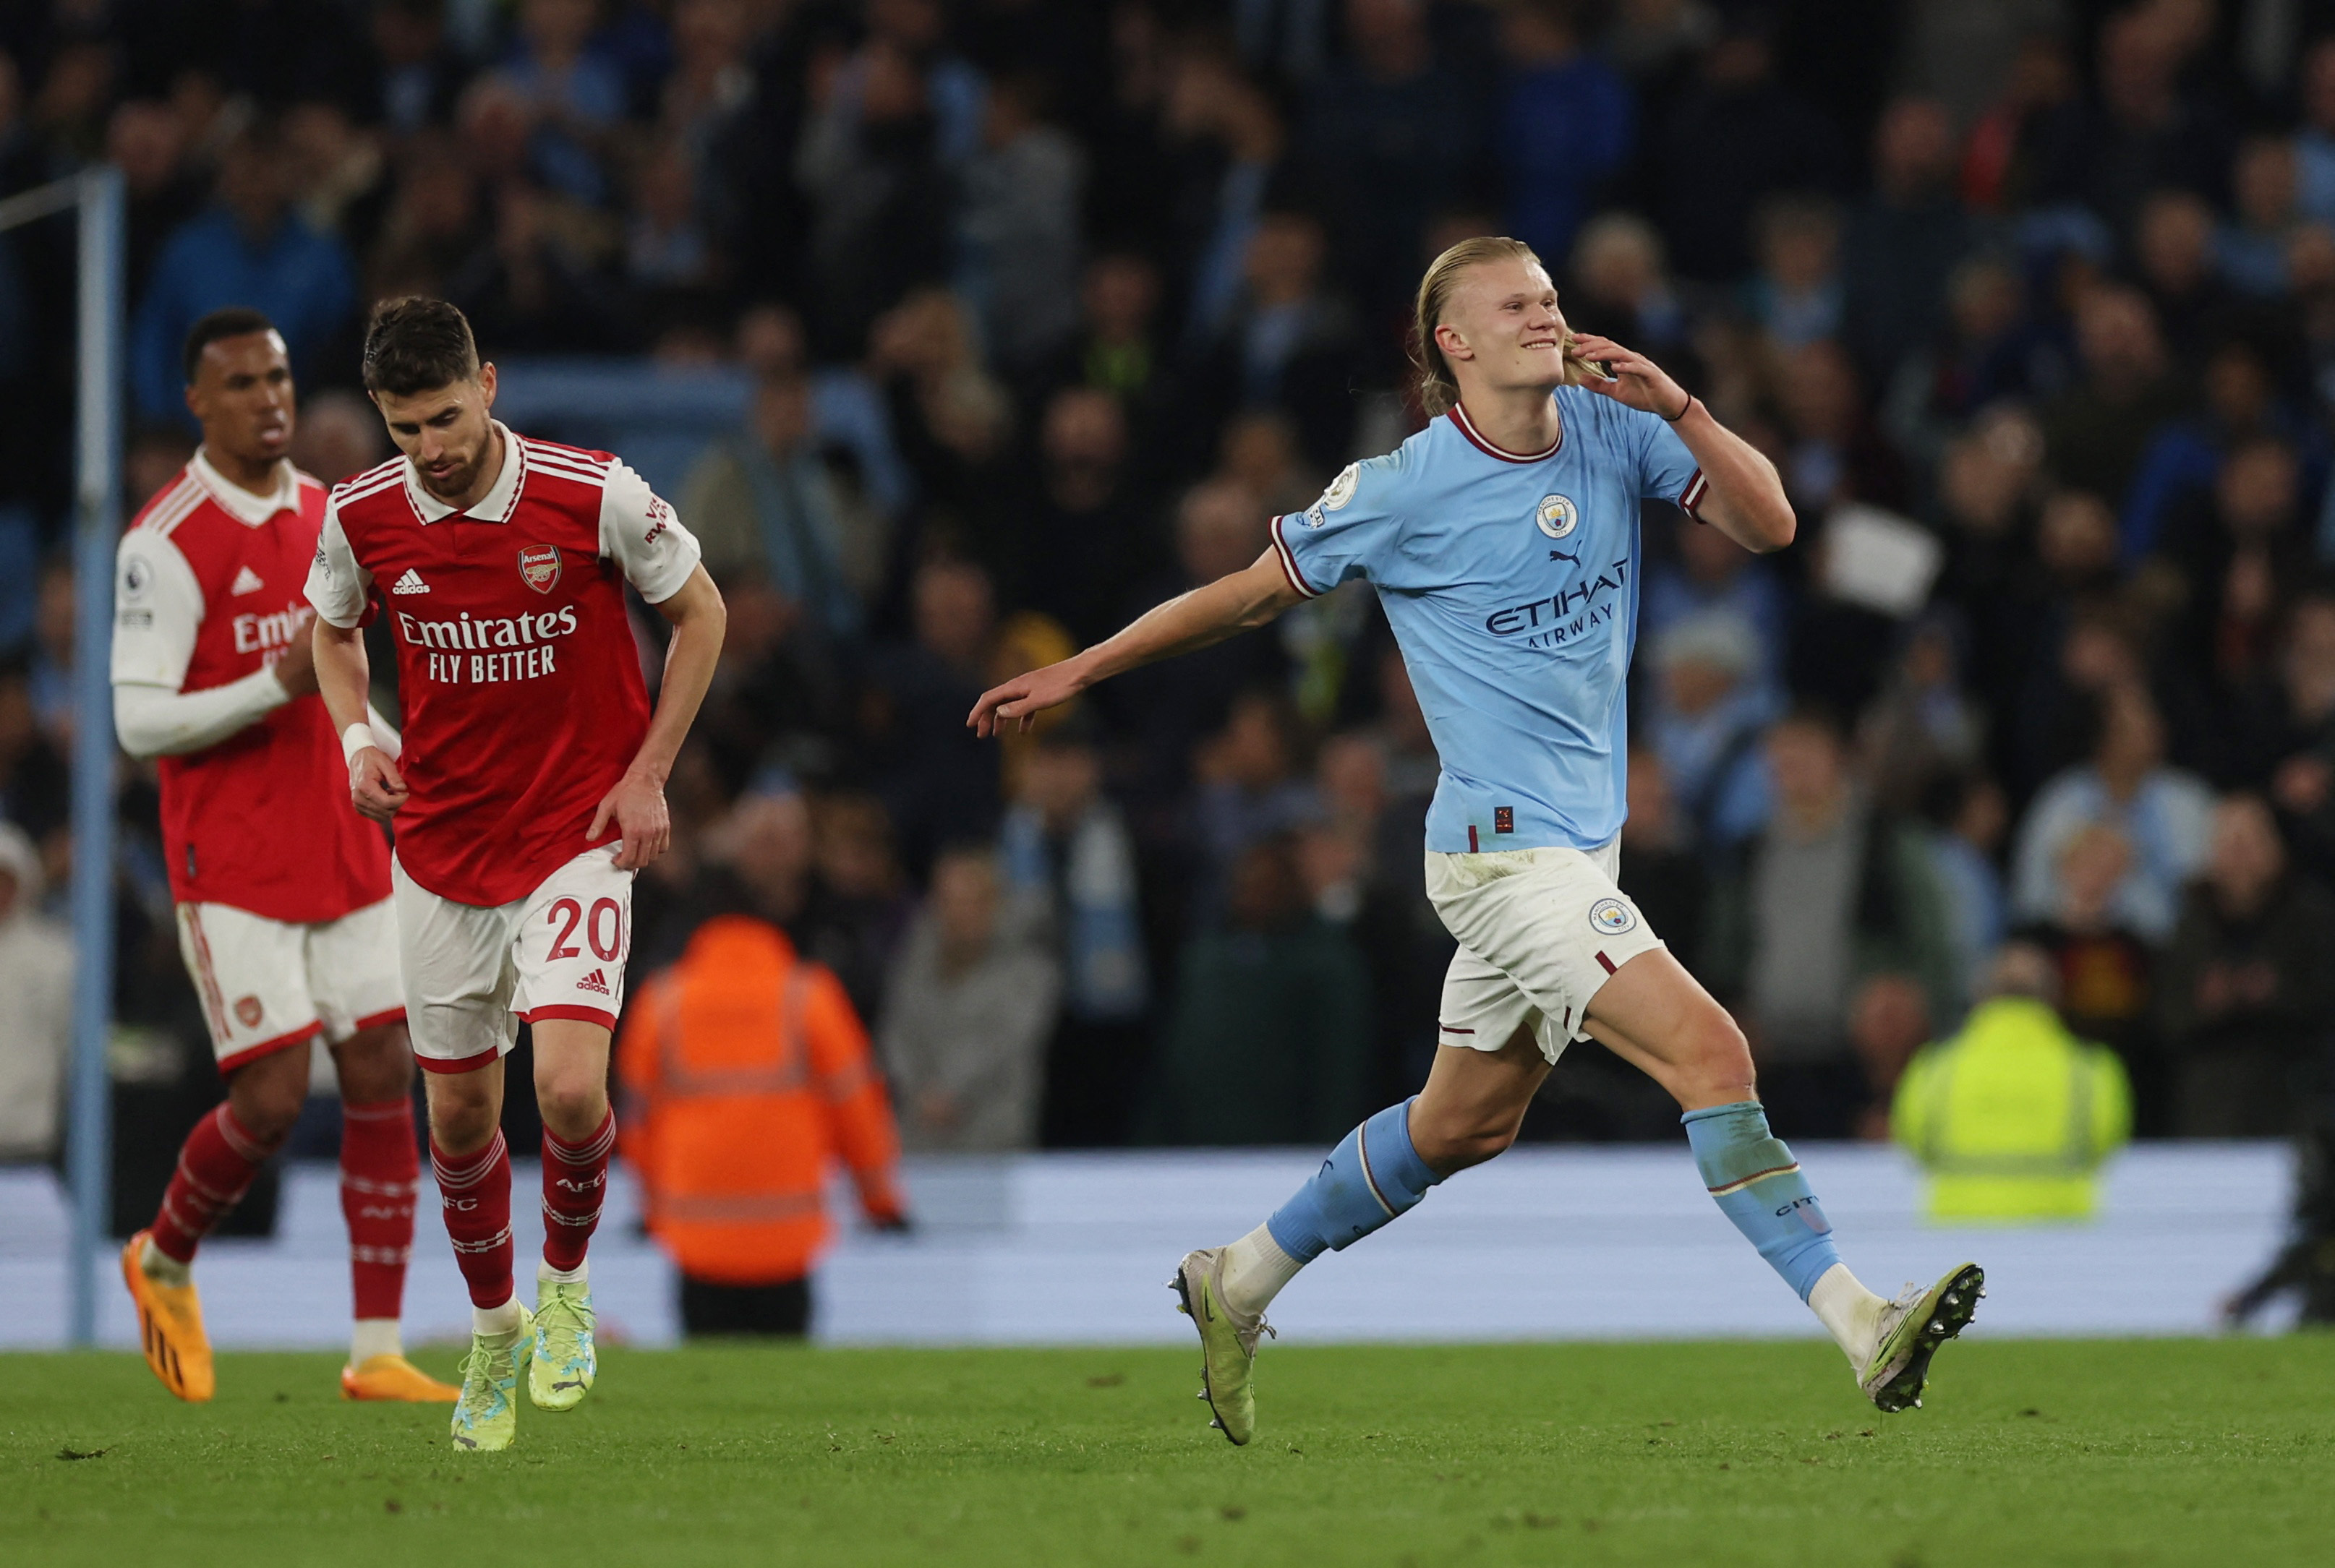 Man City beats Arsenal 4-1, and the Premier League title is in